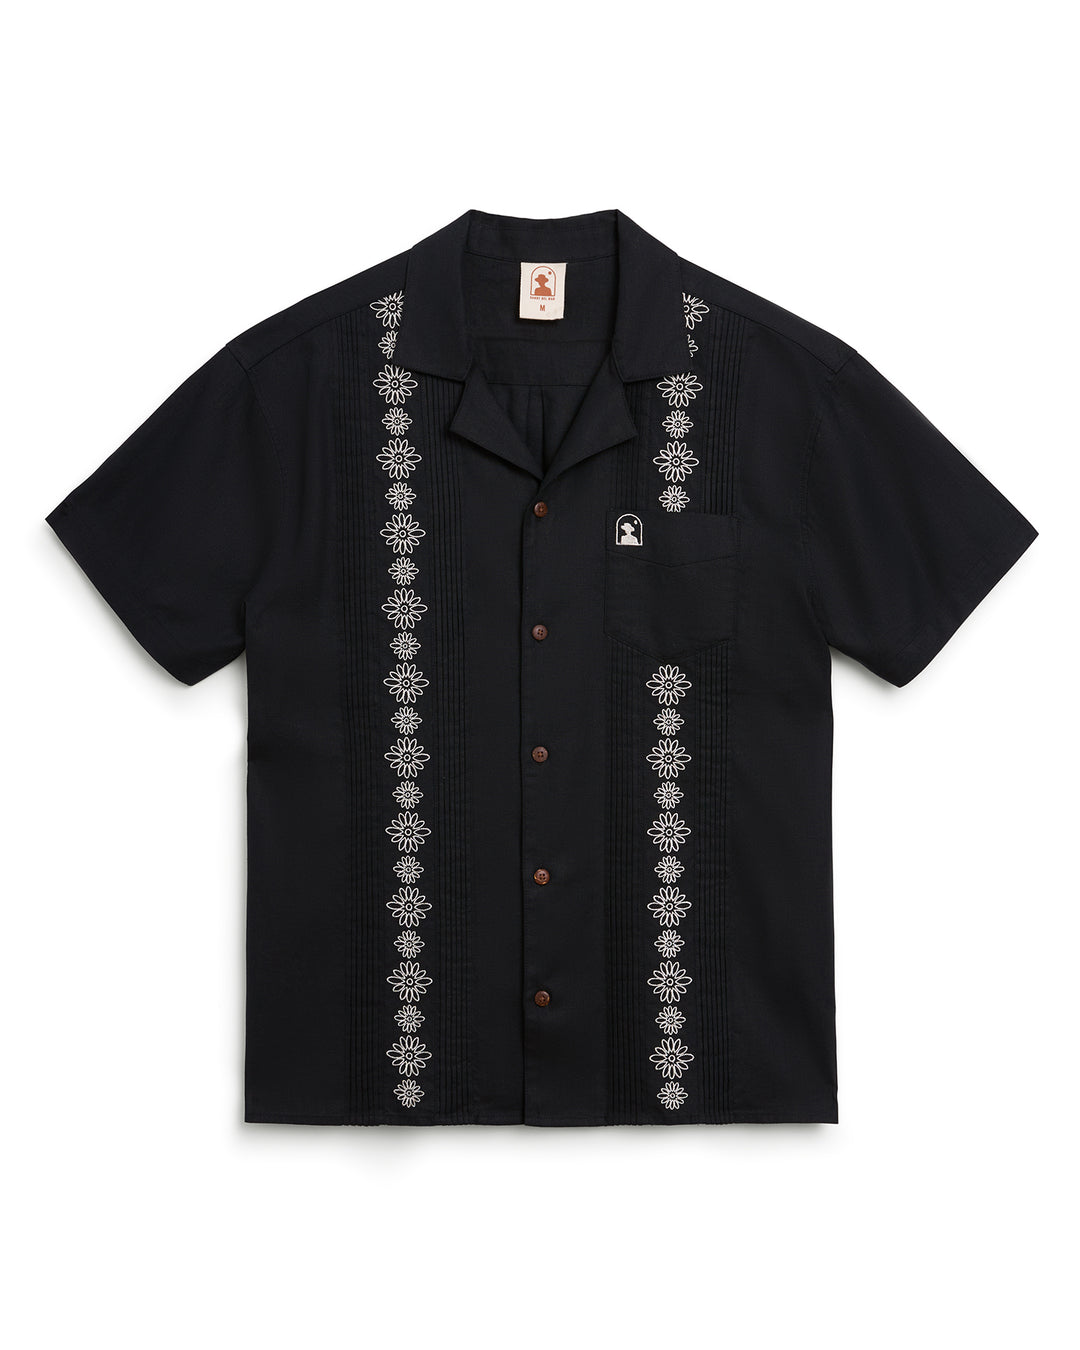 An embroidered Brisa Linen Shirt - Onyx by Dandy Del Mar.